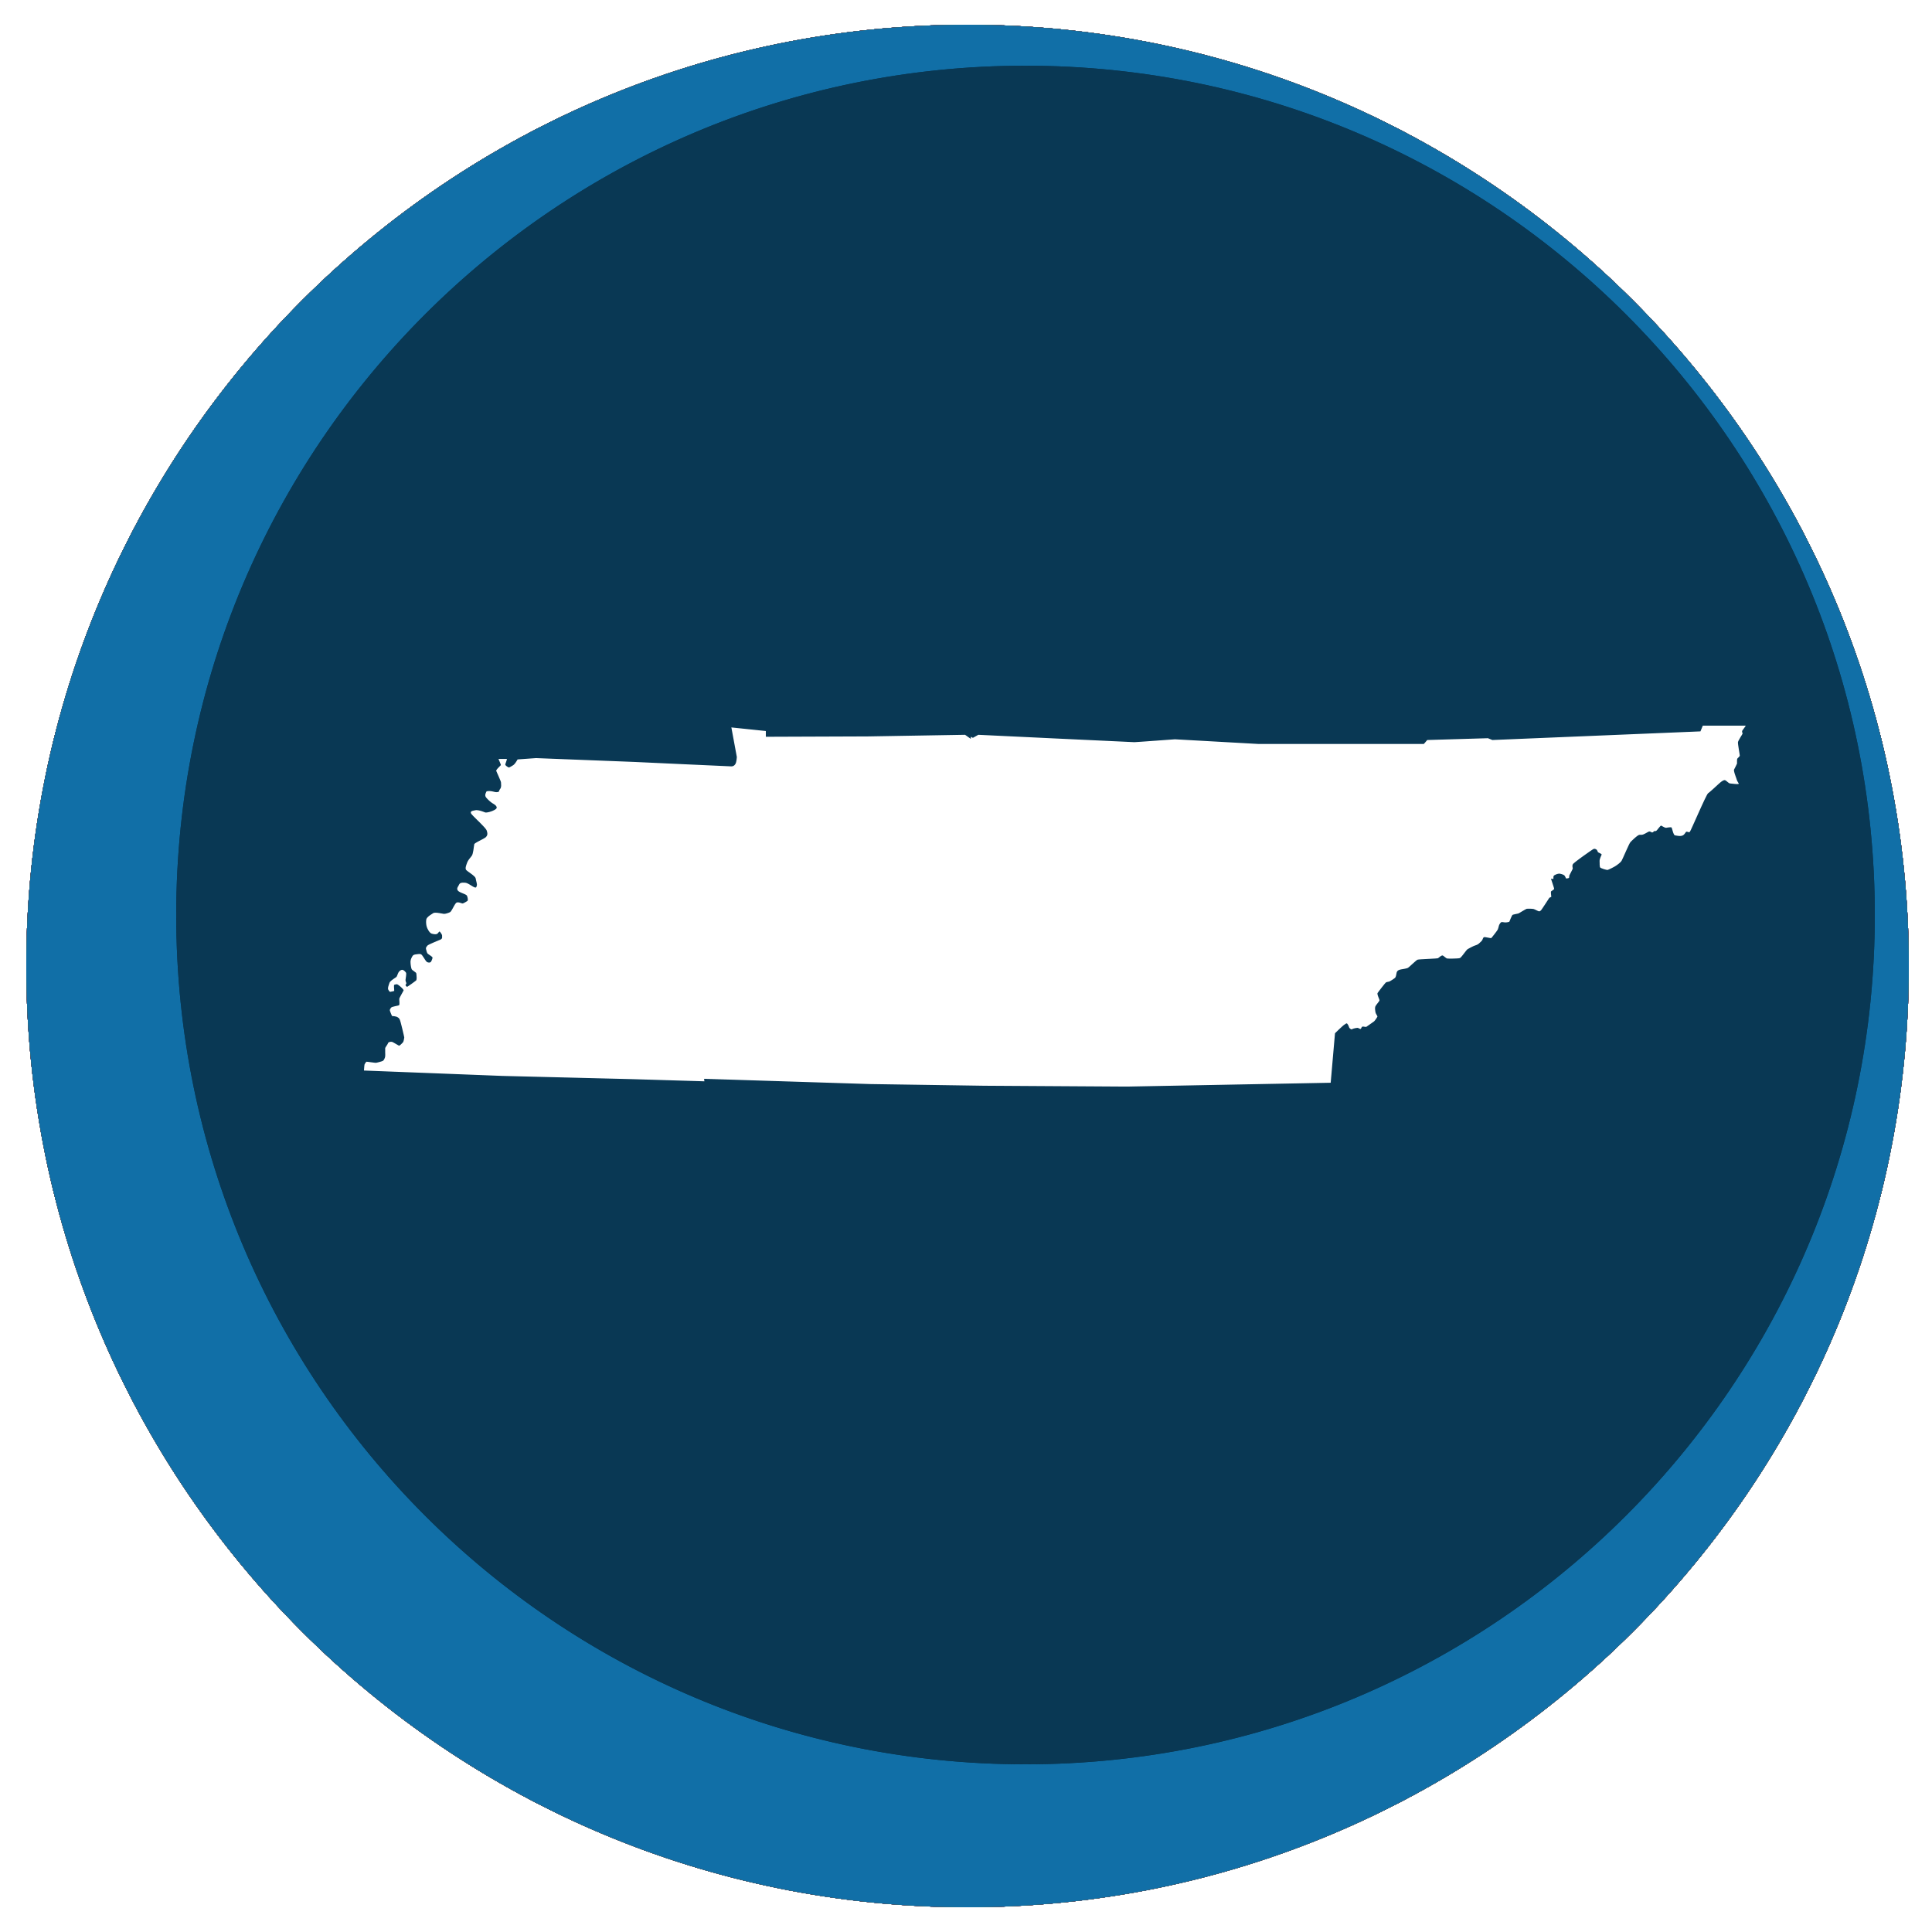 Tennessee state shape in a circle